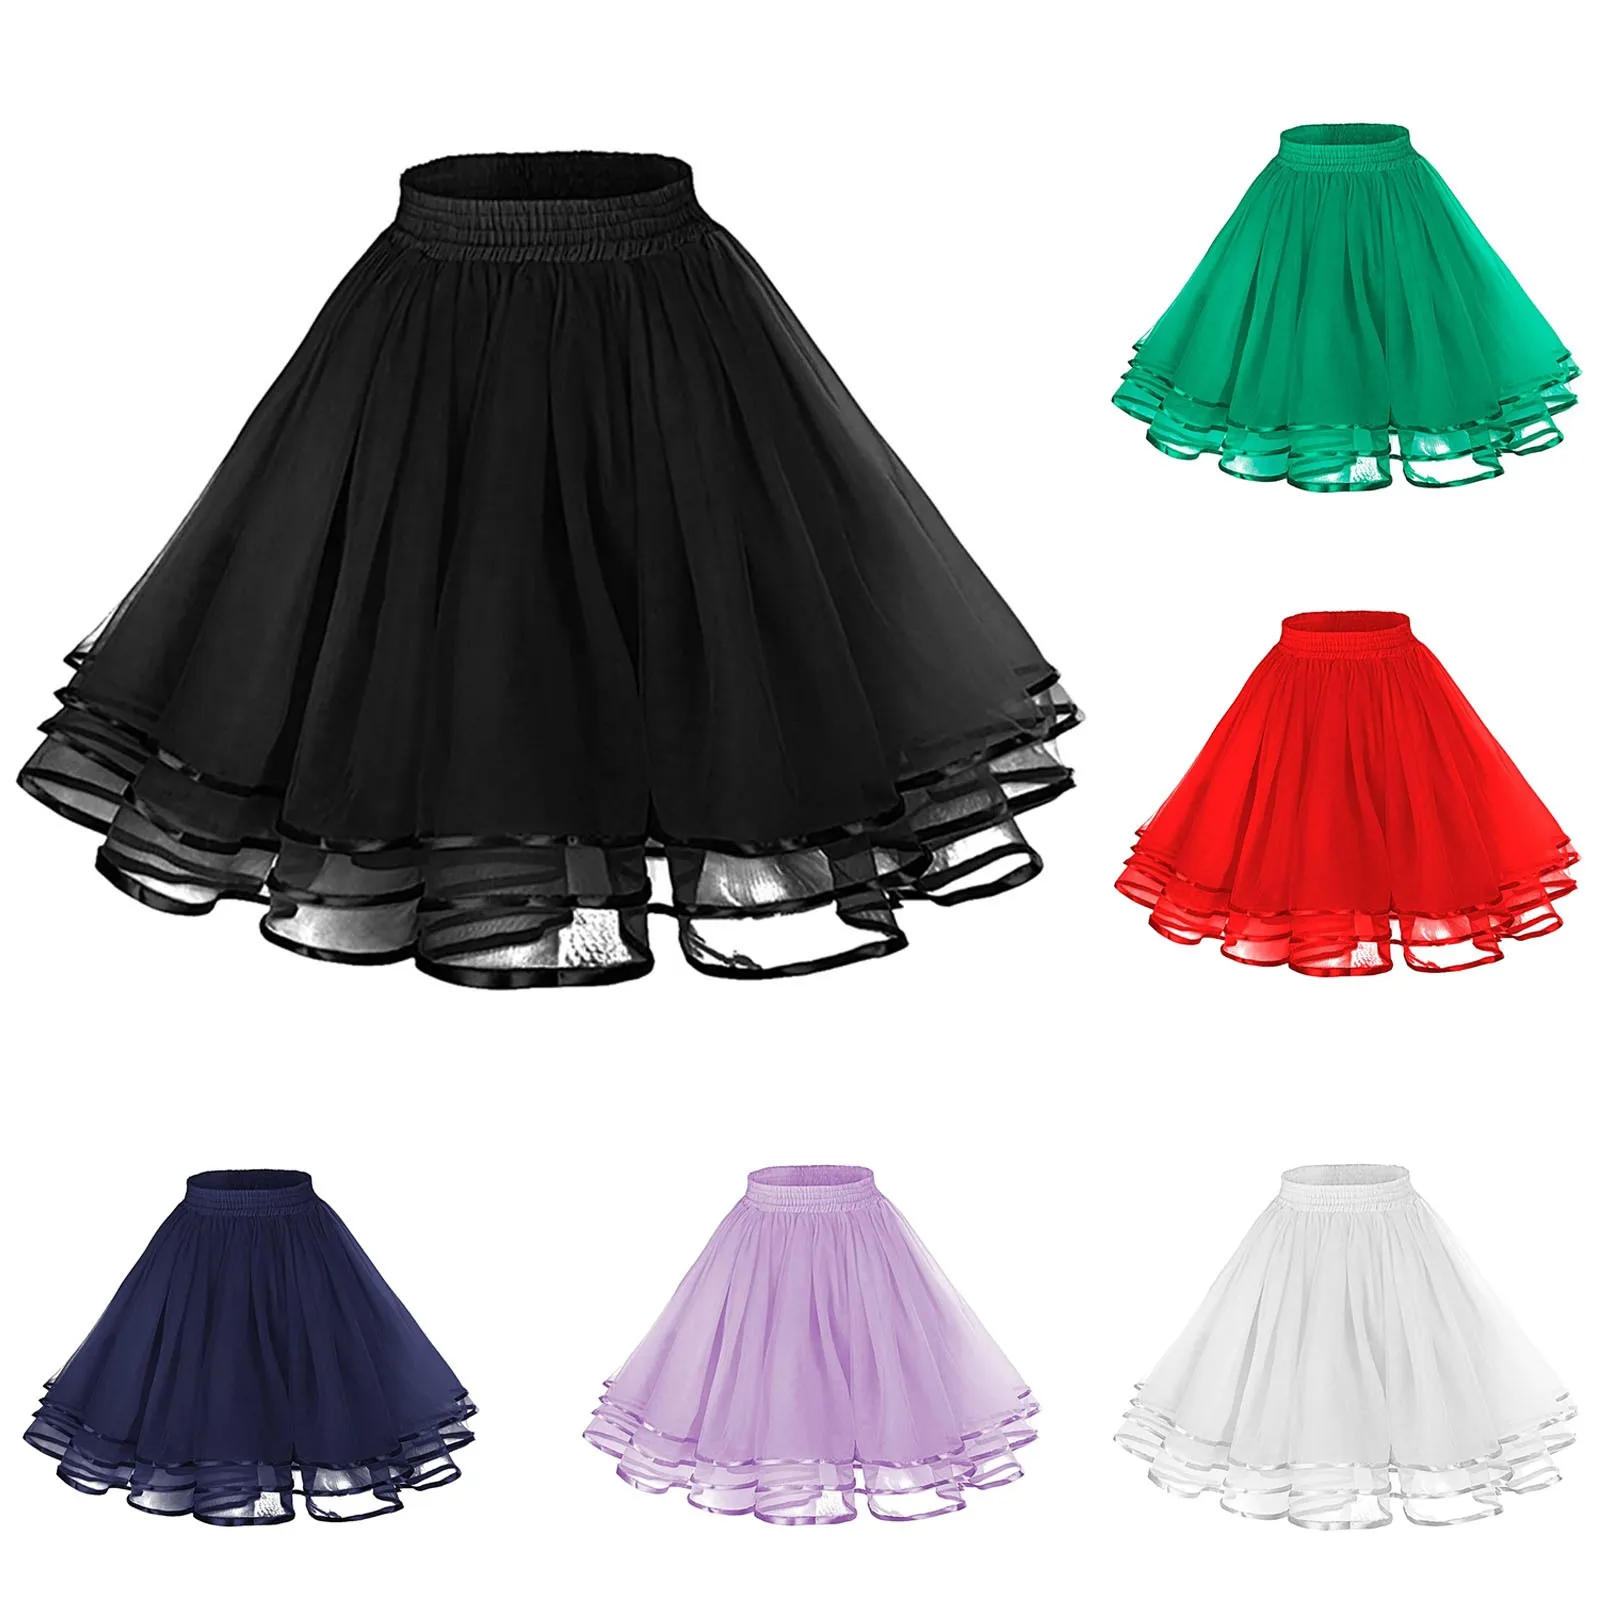 

Carnival Solid Colour Performance Costume Half Skirt Women's High Waisted A Line Short Half Body Skirt Fashion Party Puffy Skirt